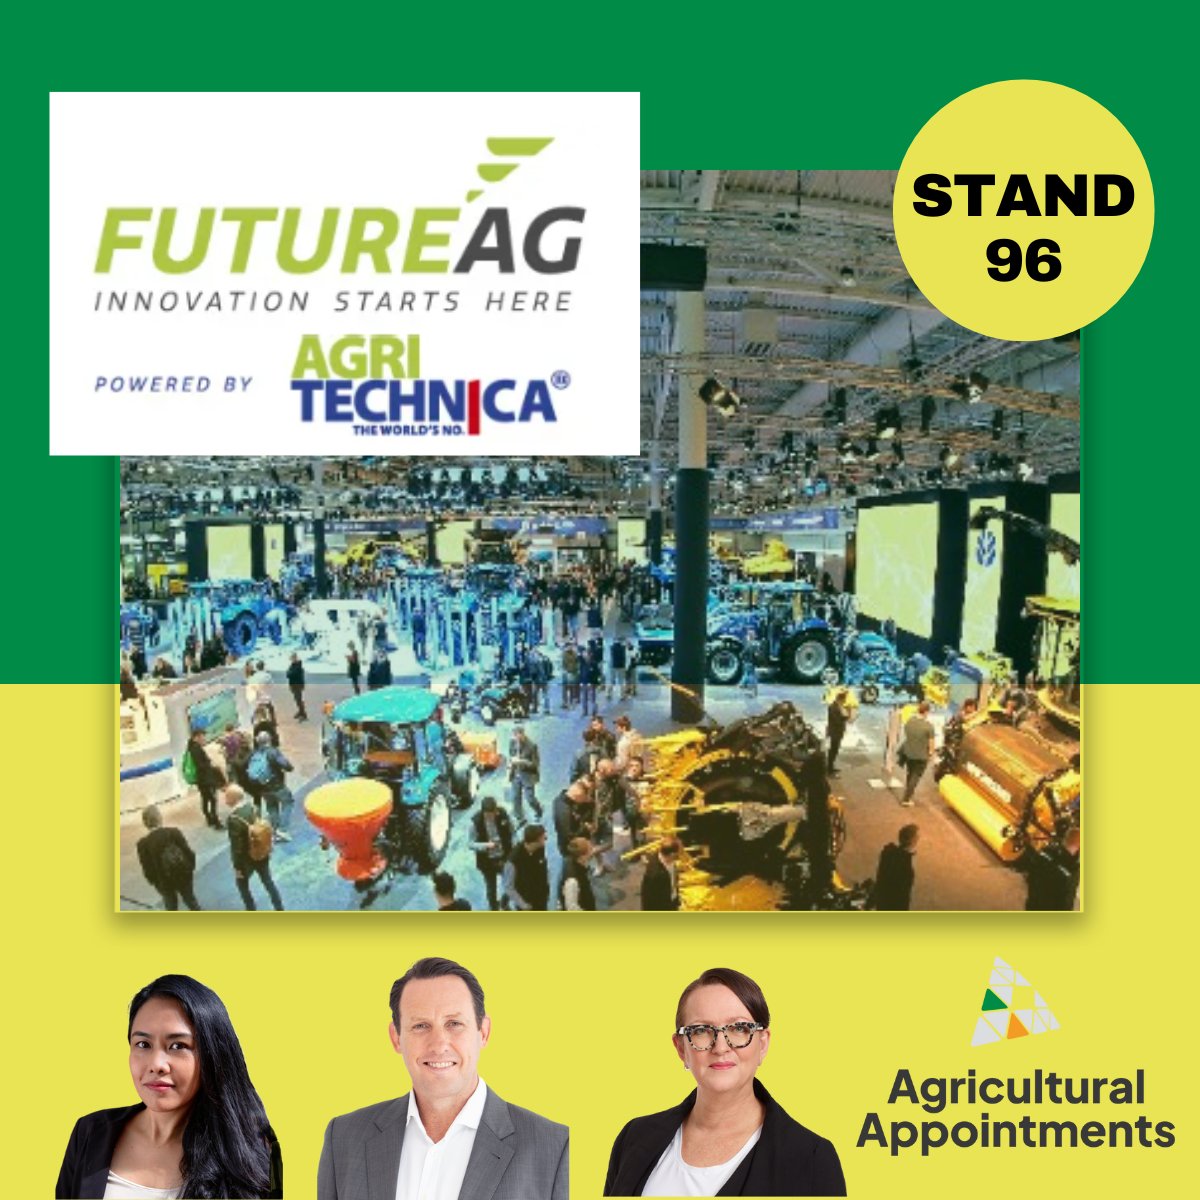 Come and meet our talent acquisition team at FutureAg Expo next week, 17-19 April - Melbourne Showgrounds. Stand #96. ow.ly/Q89v50ReL5r #agjobs #seek #agchatoz #agriculture #farming #agribusiness #futureagexpo